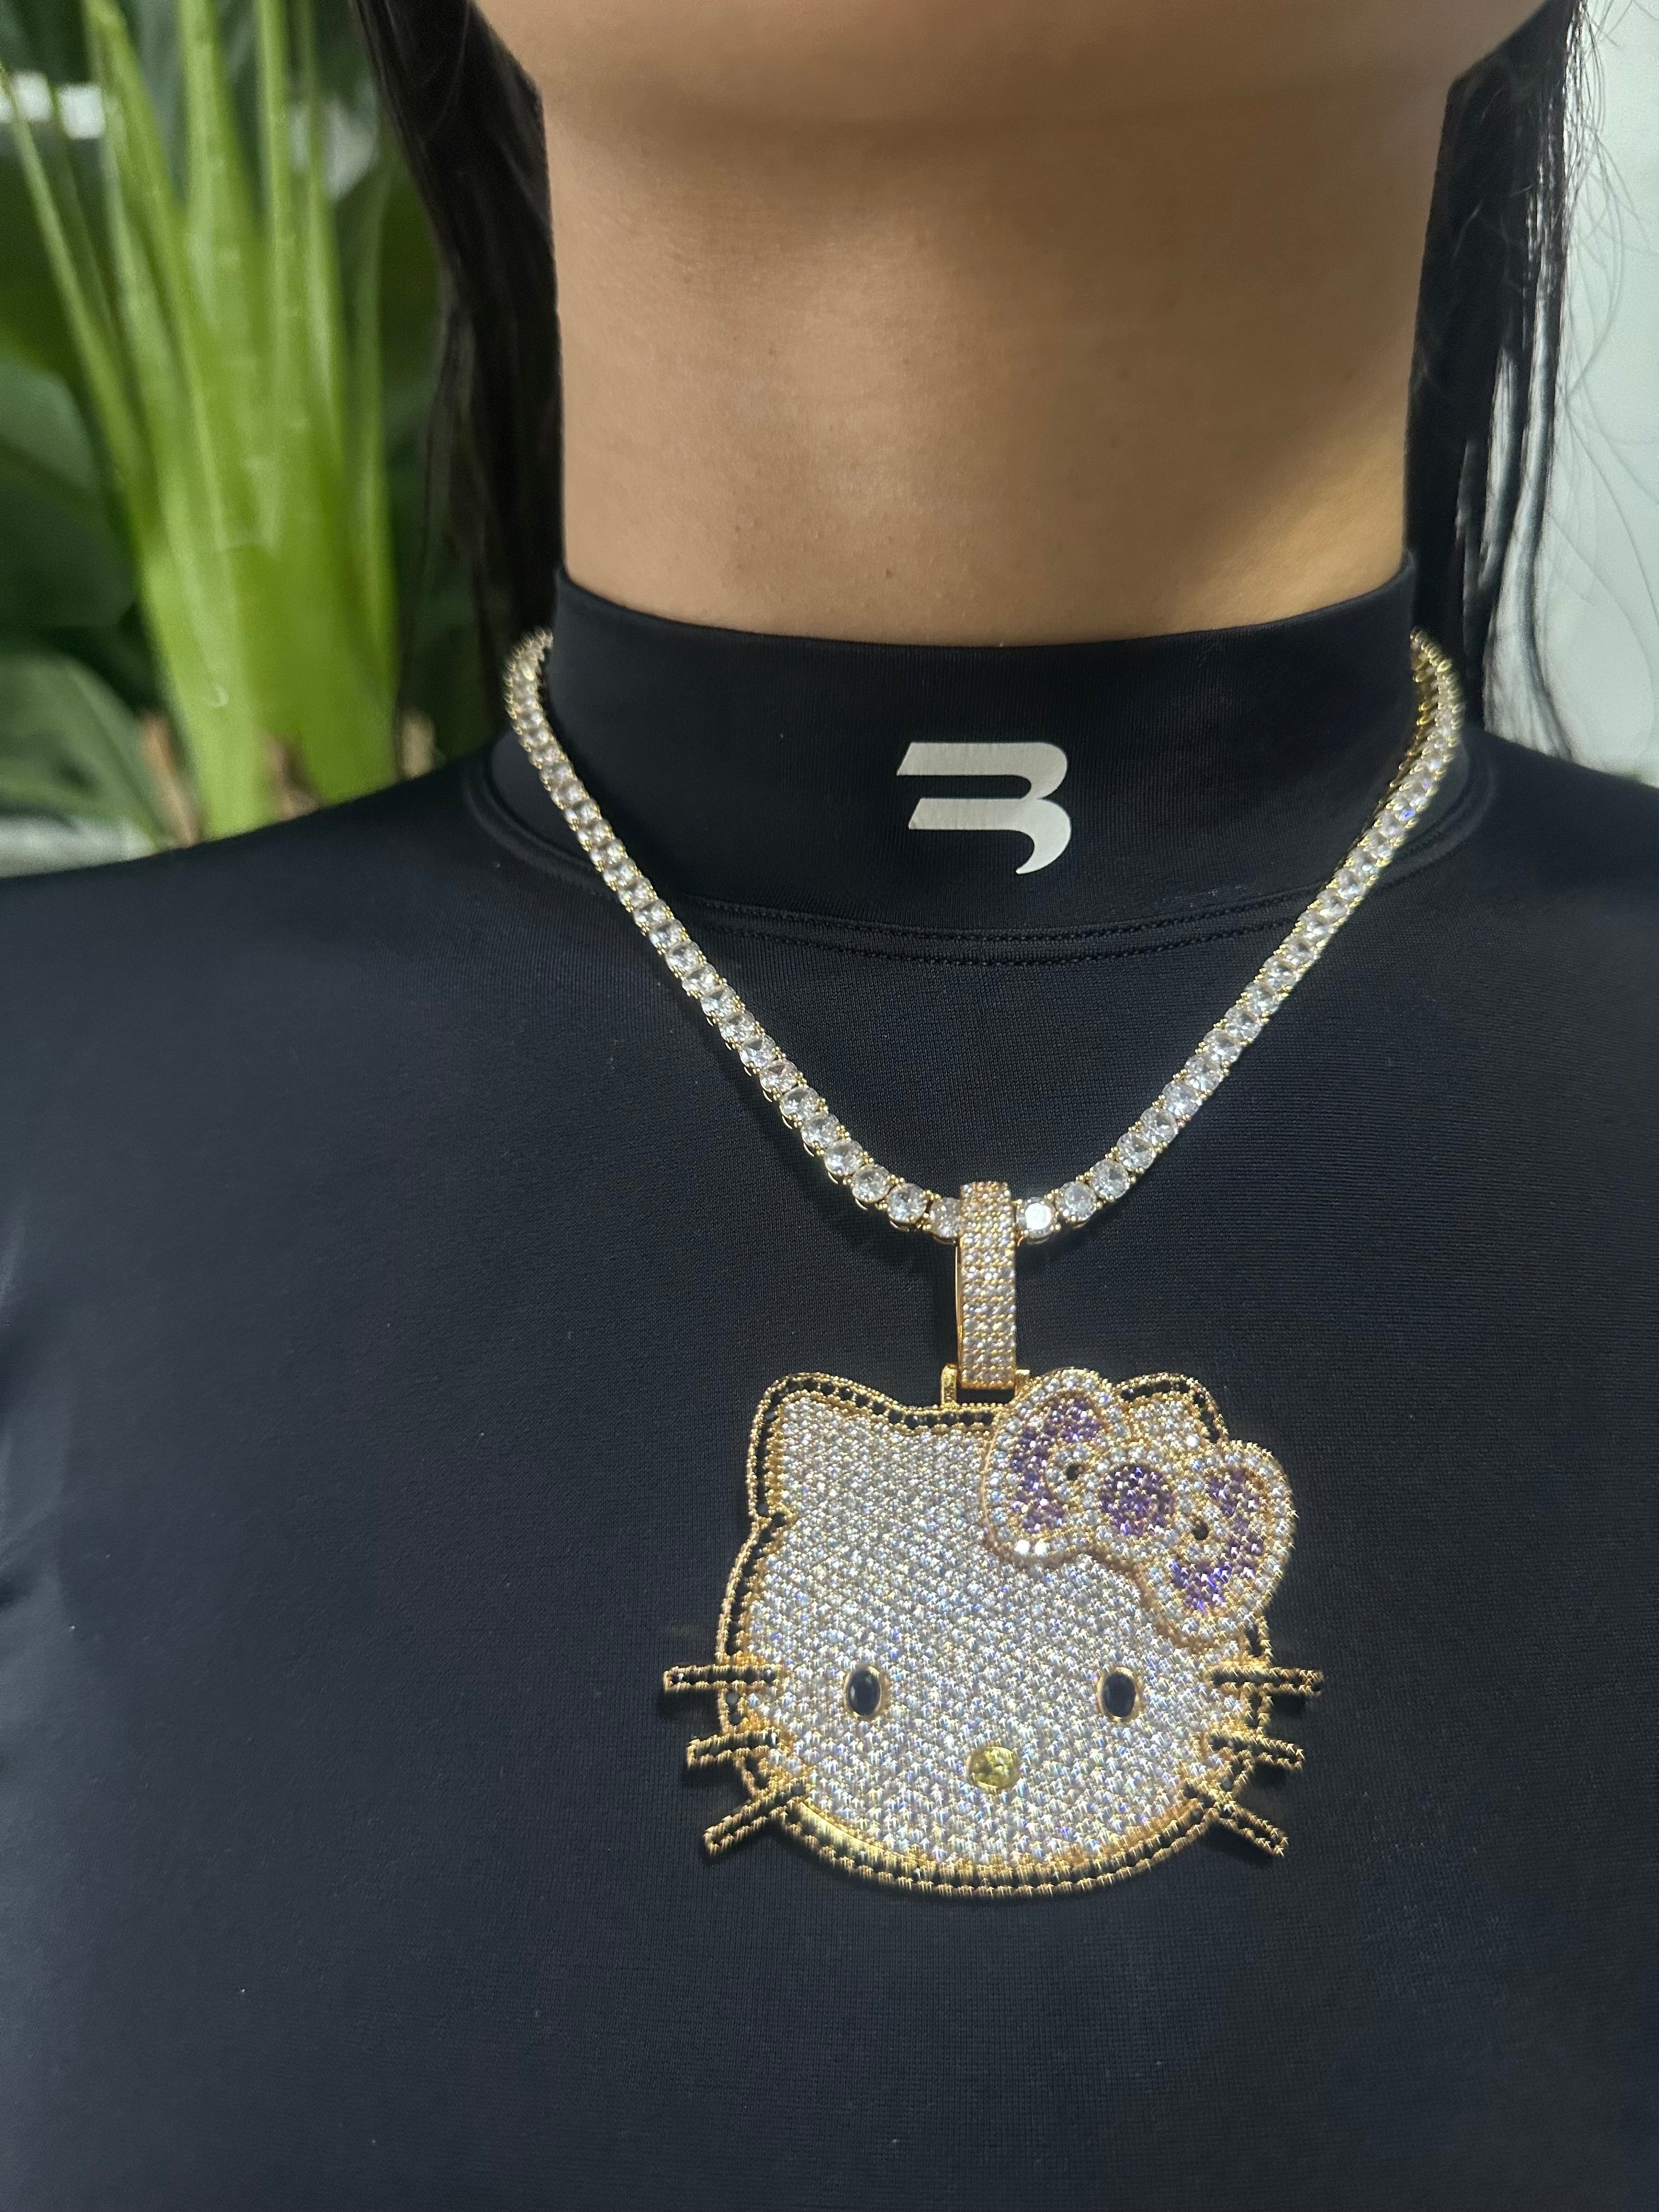 Buy Hello Kitty Crystal Pendant Online in India - Etsy